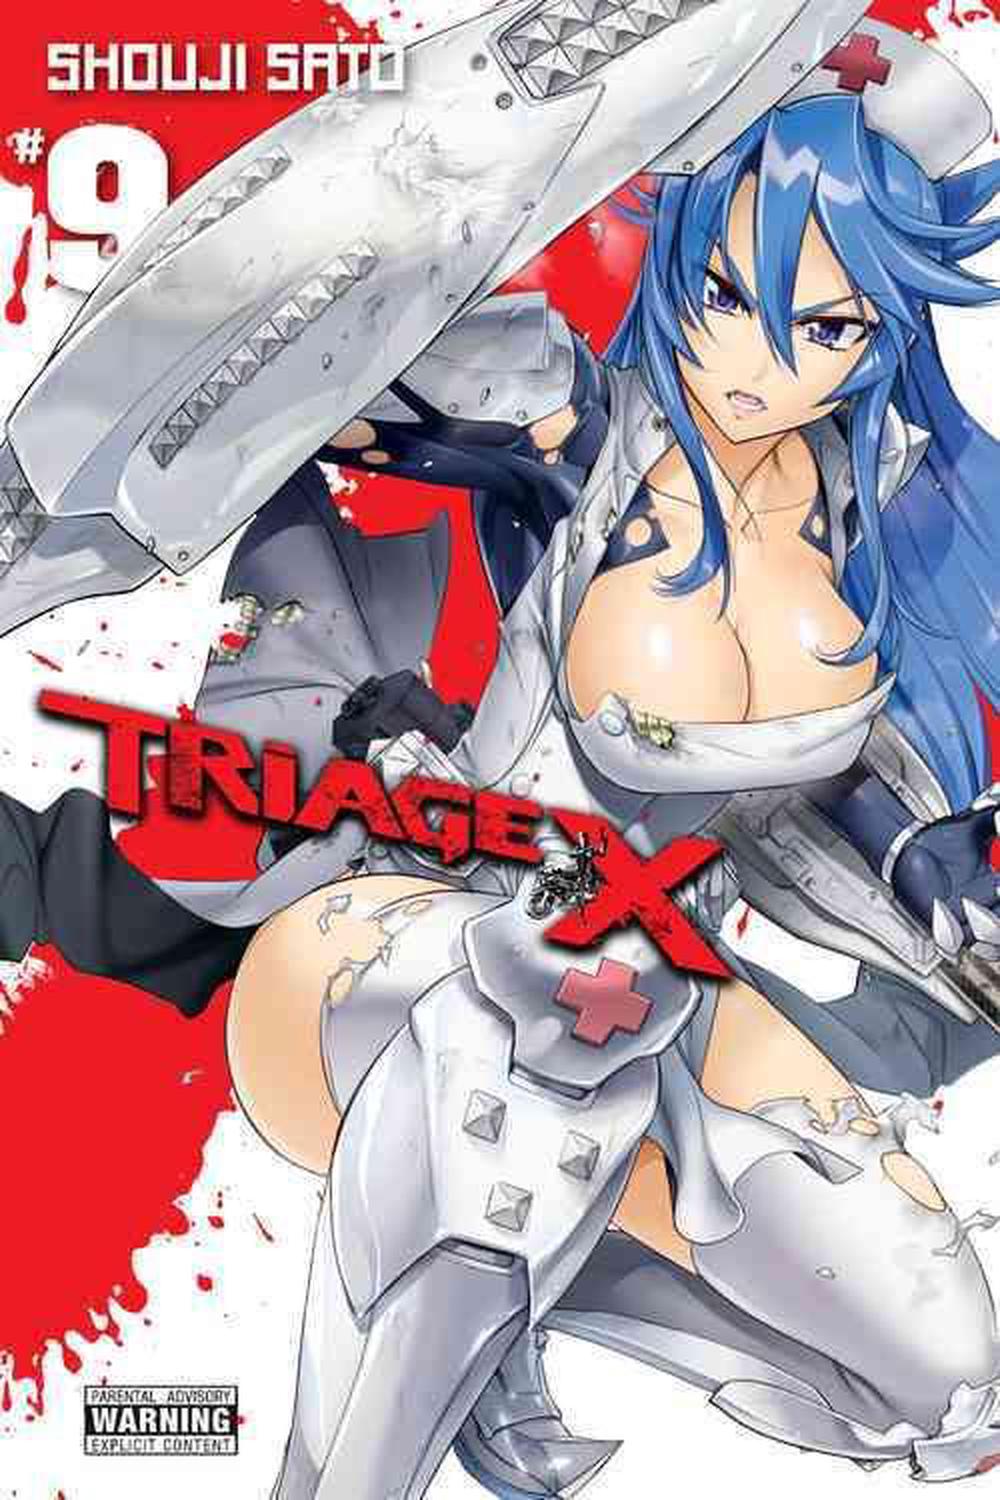 Triage X Vol 9 By Shouji Sato Paperback Buy Online At The Nile